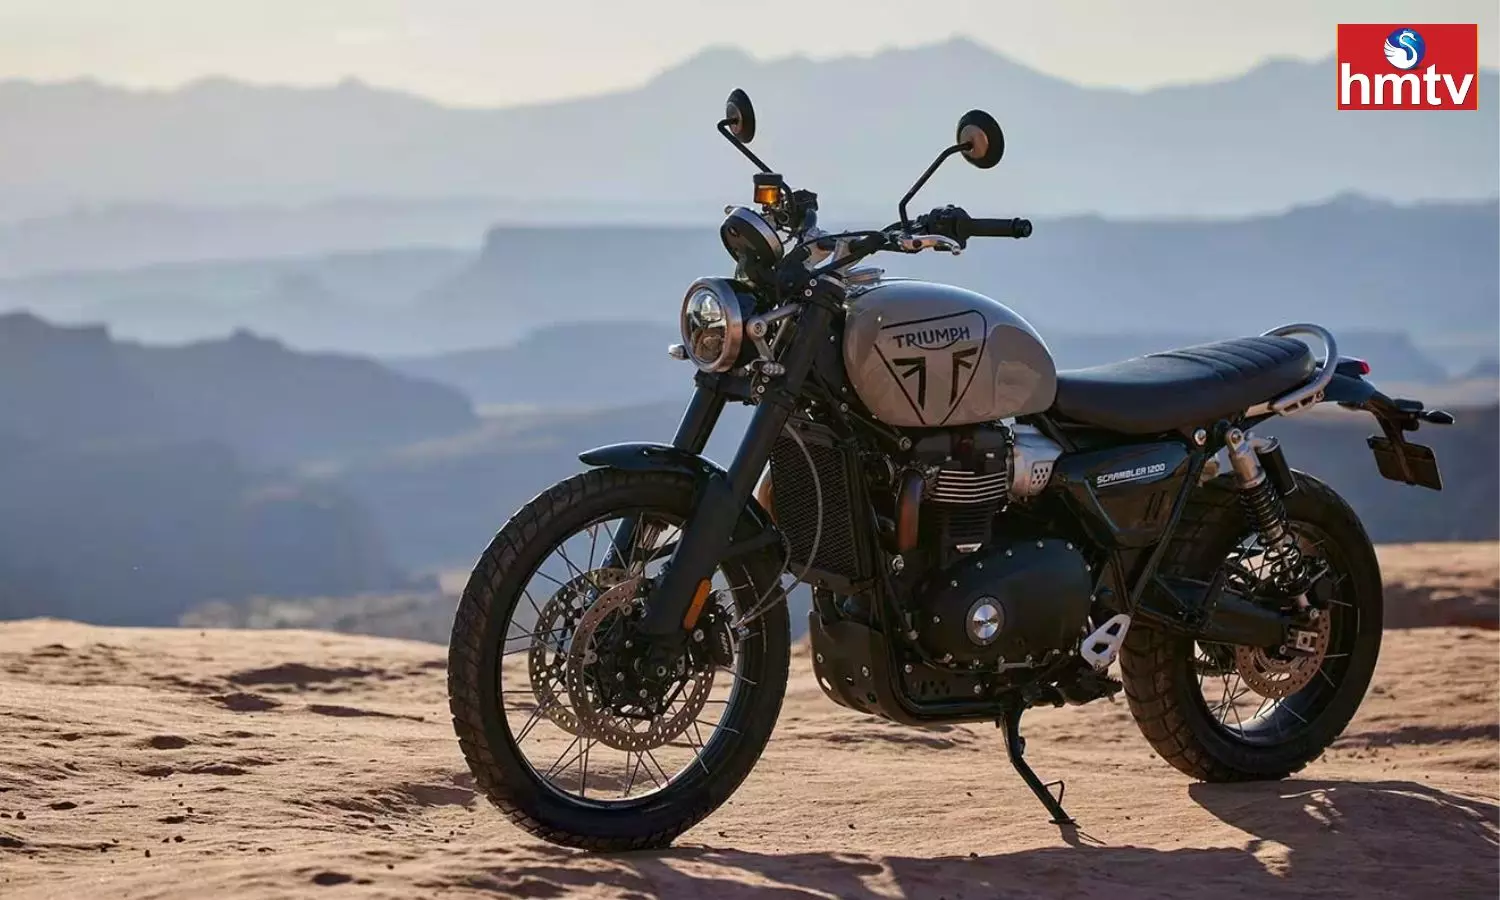 Triumph Scrambler 1200X Bike Launched In India With RS 11.83 Lakh